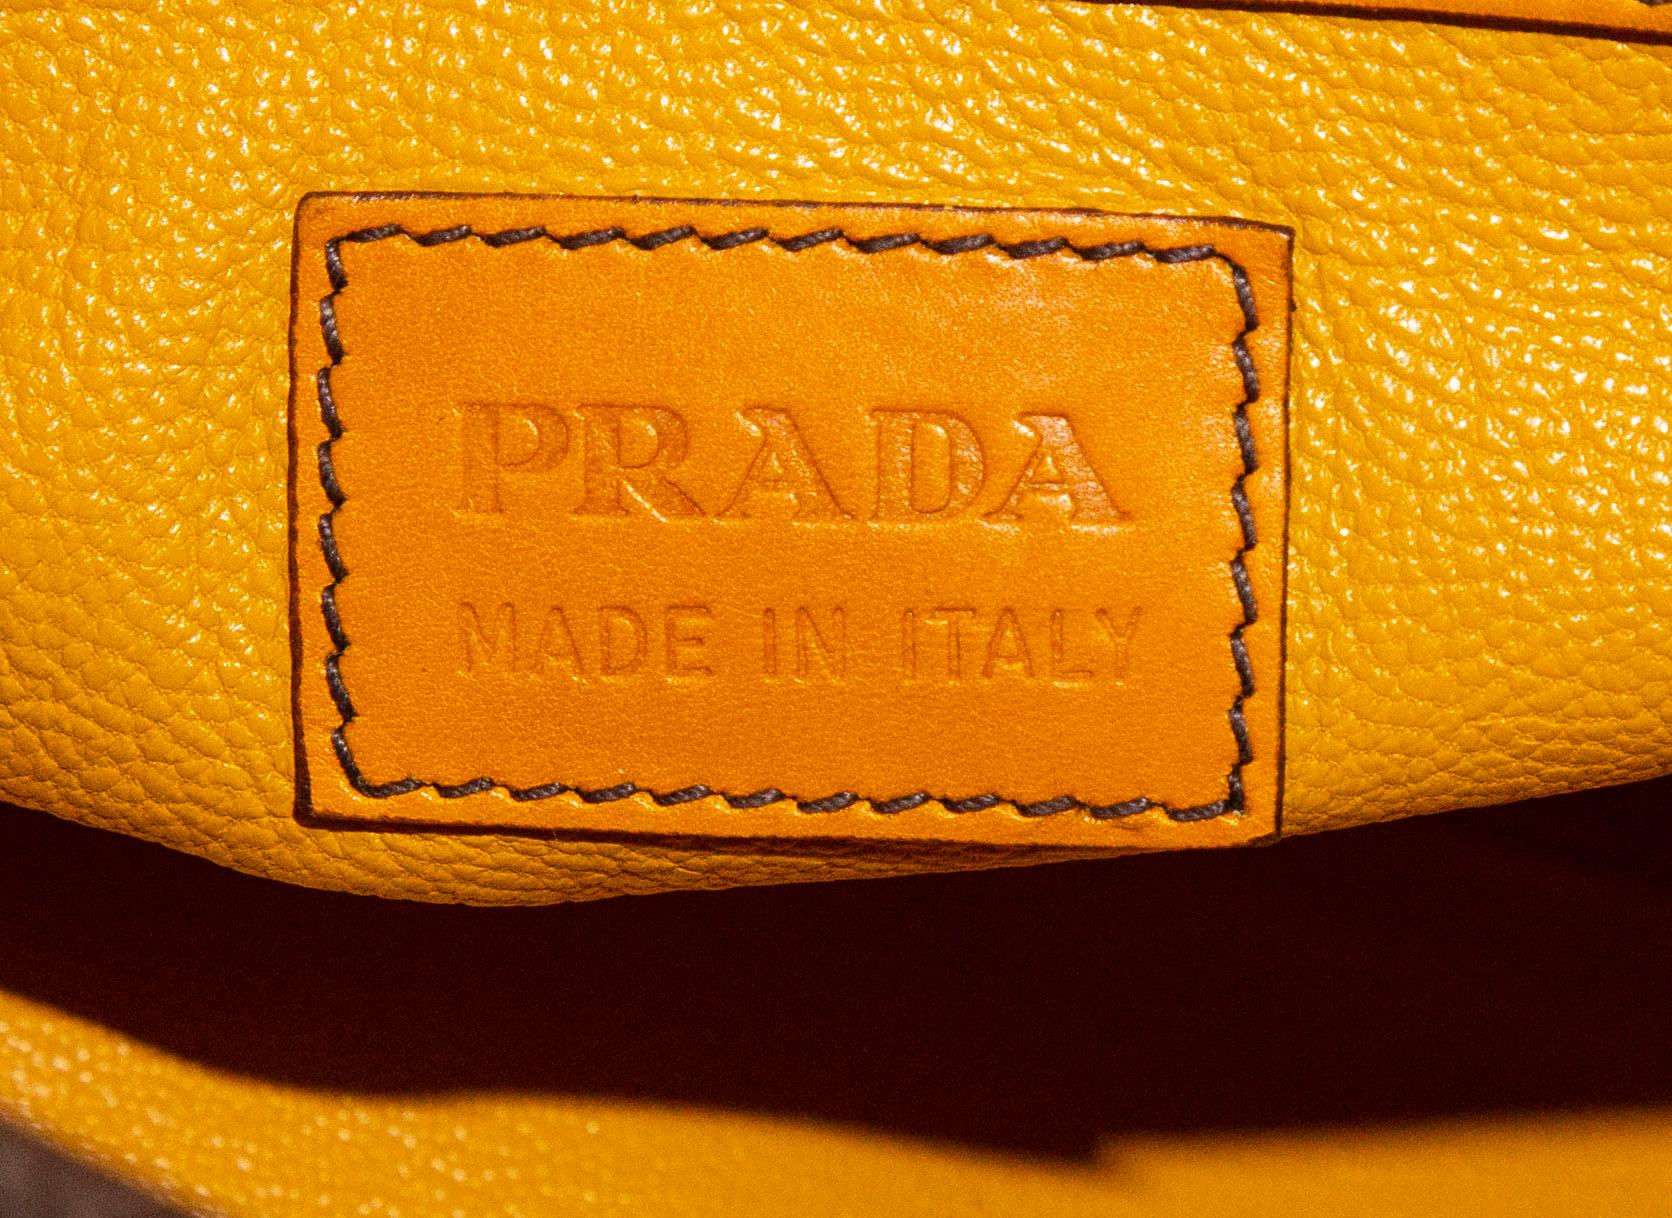 Prada Large Shoulder Bag in Brown Canvas and Yellow Leather Trim For Sale 5